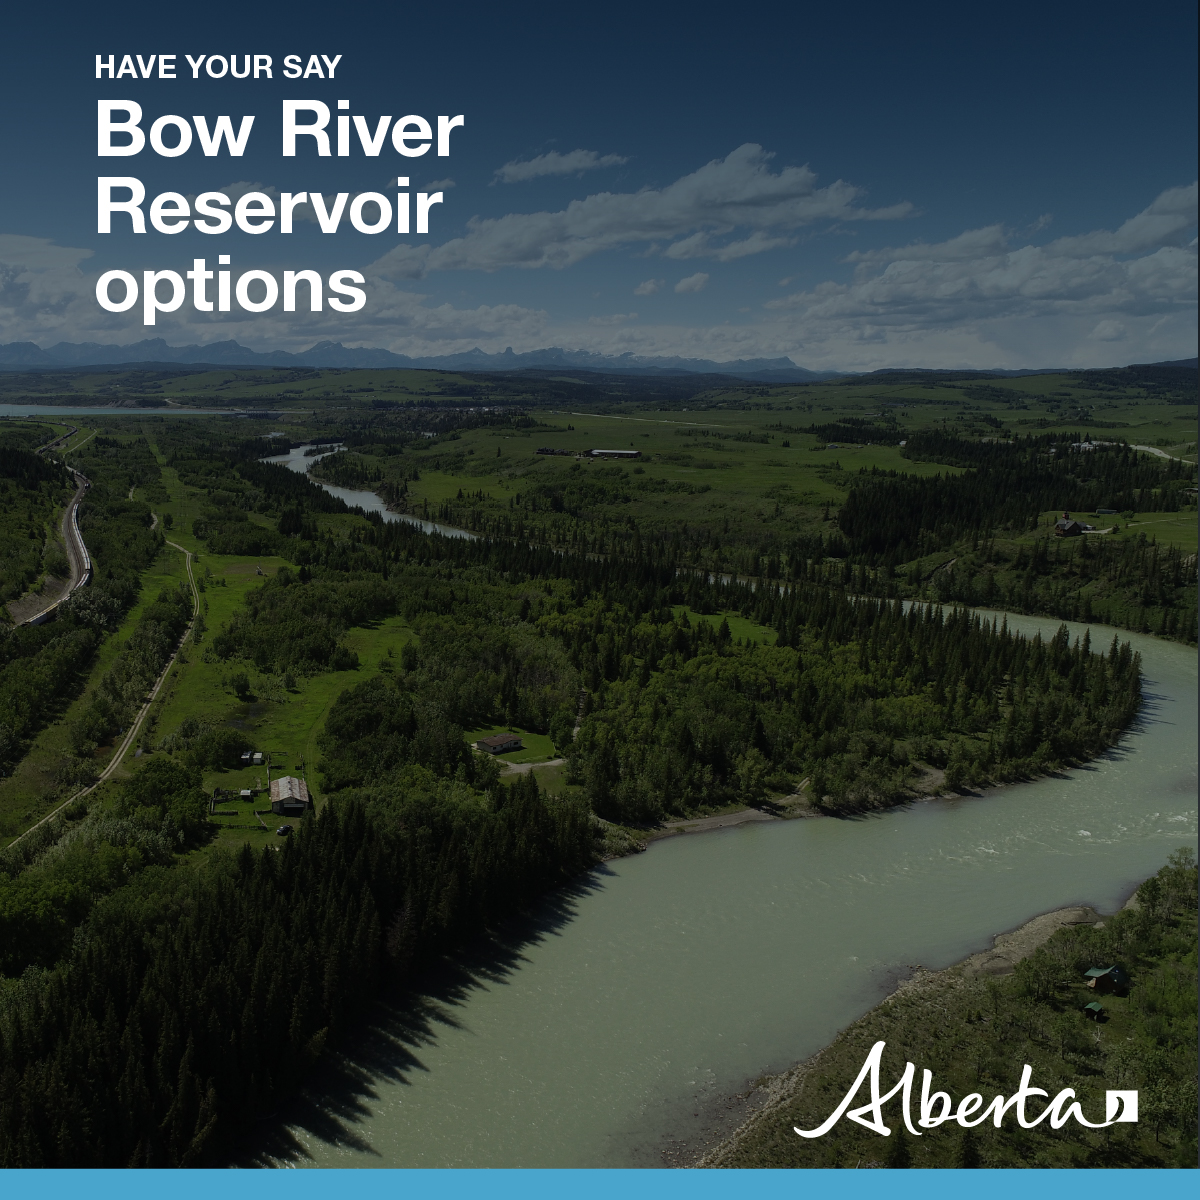 Have your say on options to help reduce the impact of flood and drought on the Bow River. With a feasibility study nearly complete, we’re seeking feedback on options to protect downstream communities. The survey is open until May 6. Learn more: alberta.ca/release.cfm?xI…